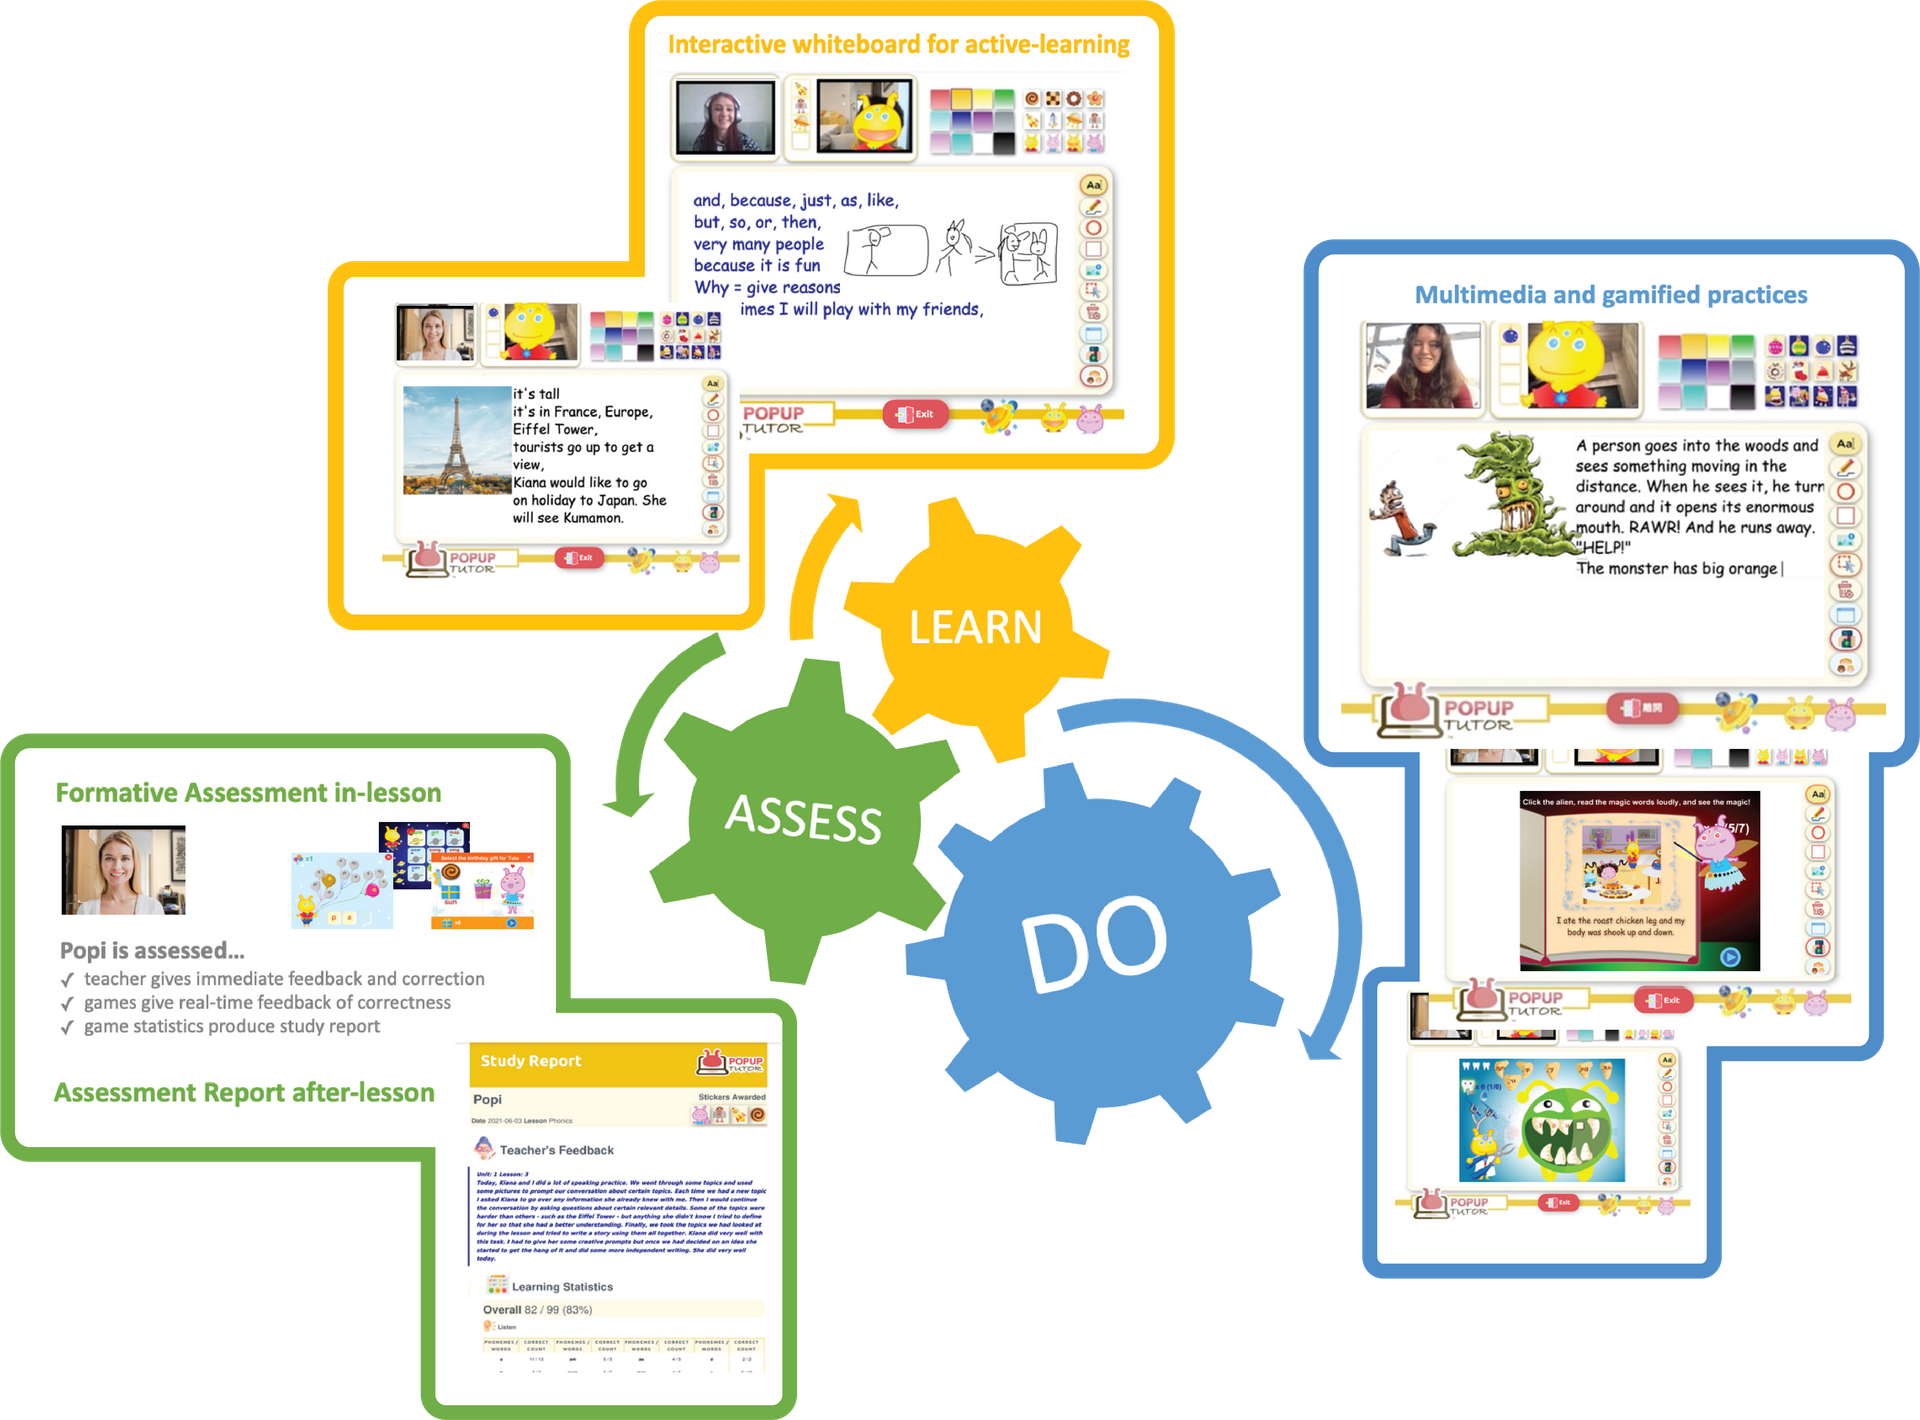 Personalised learning journey, Interactive whiteboard for active learning, multimedia and gamified practices, formative assessment